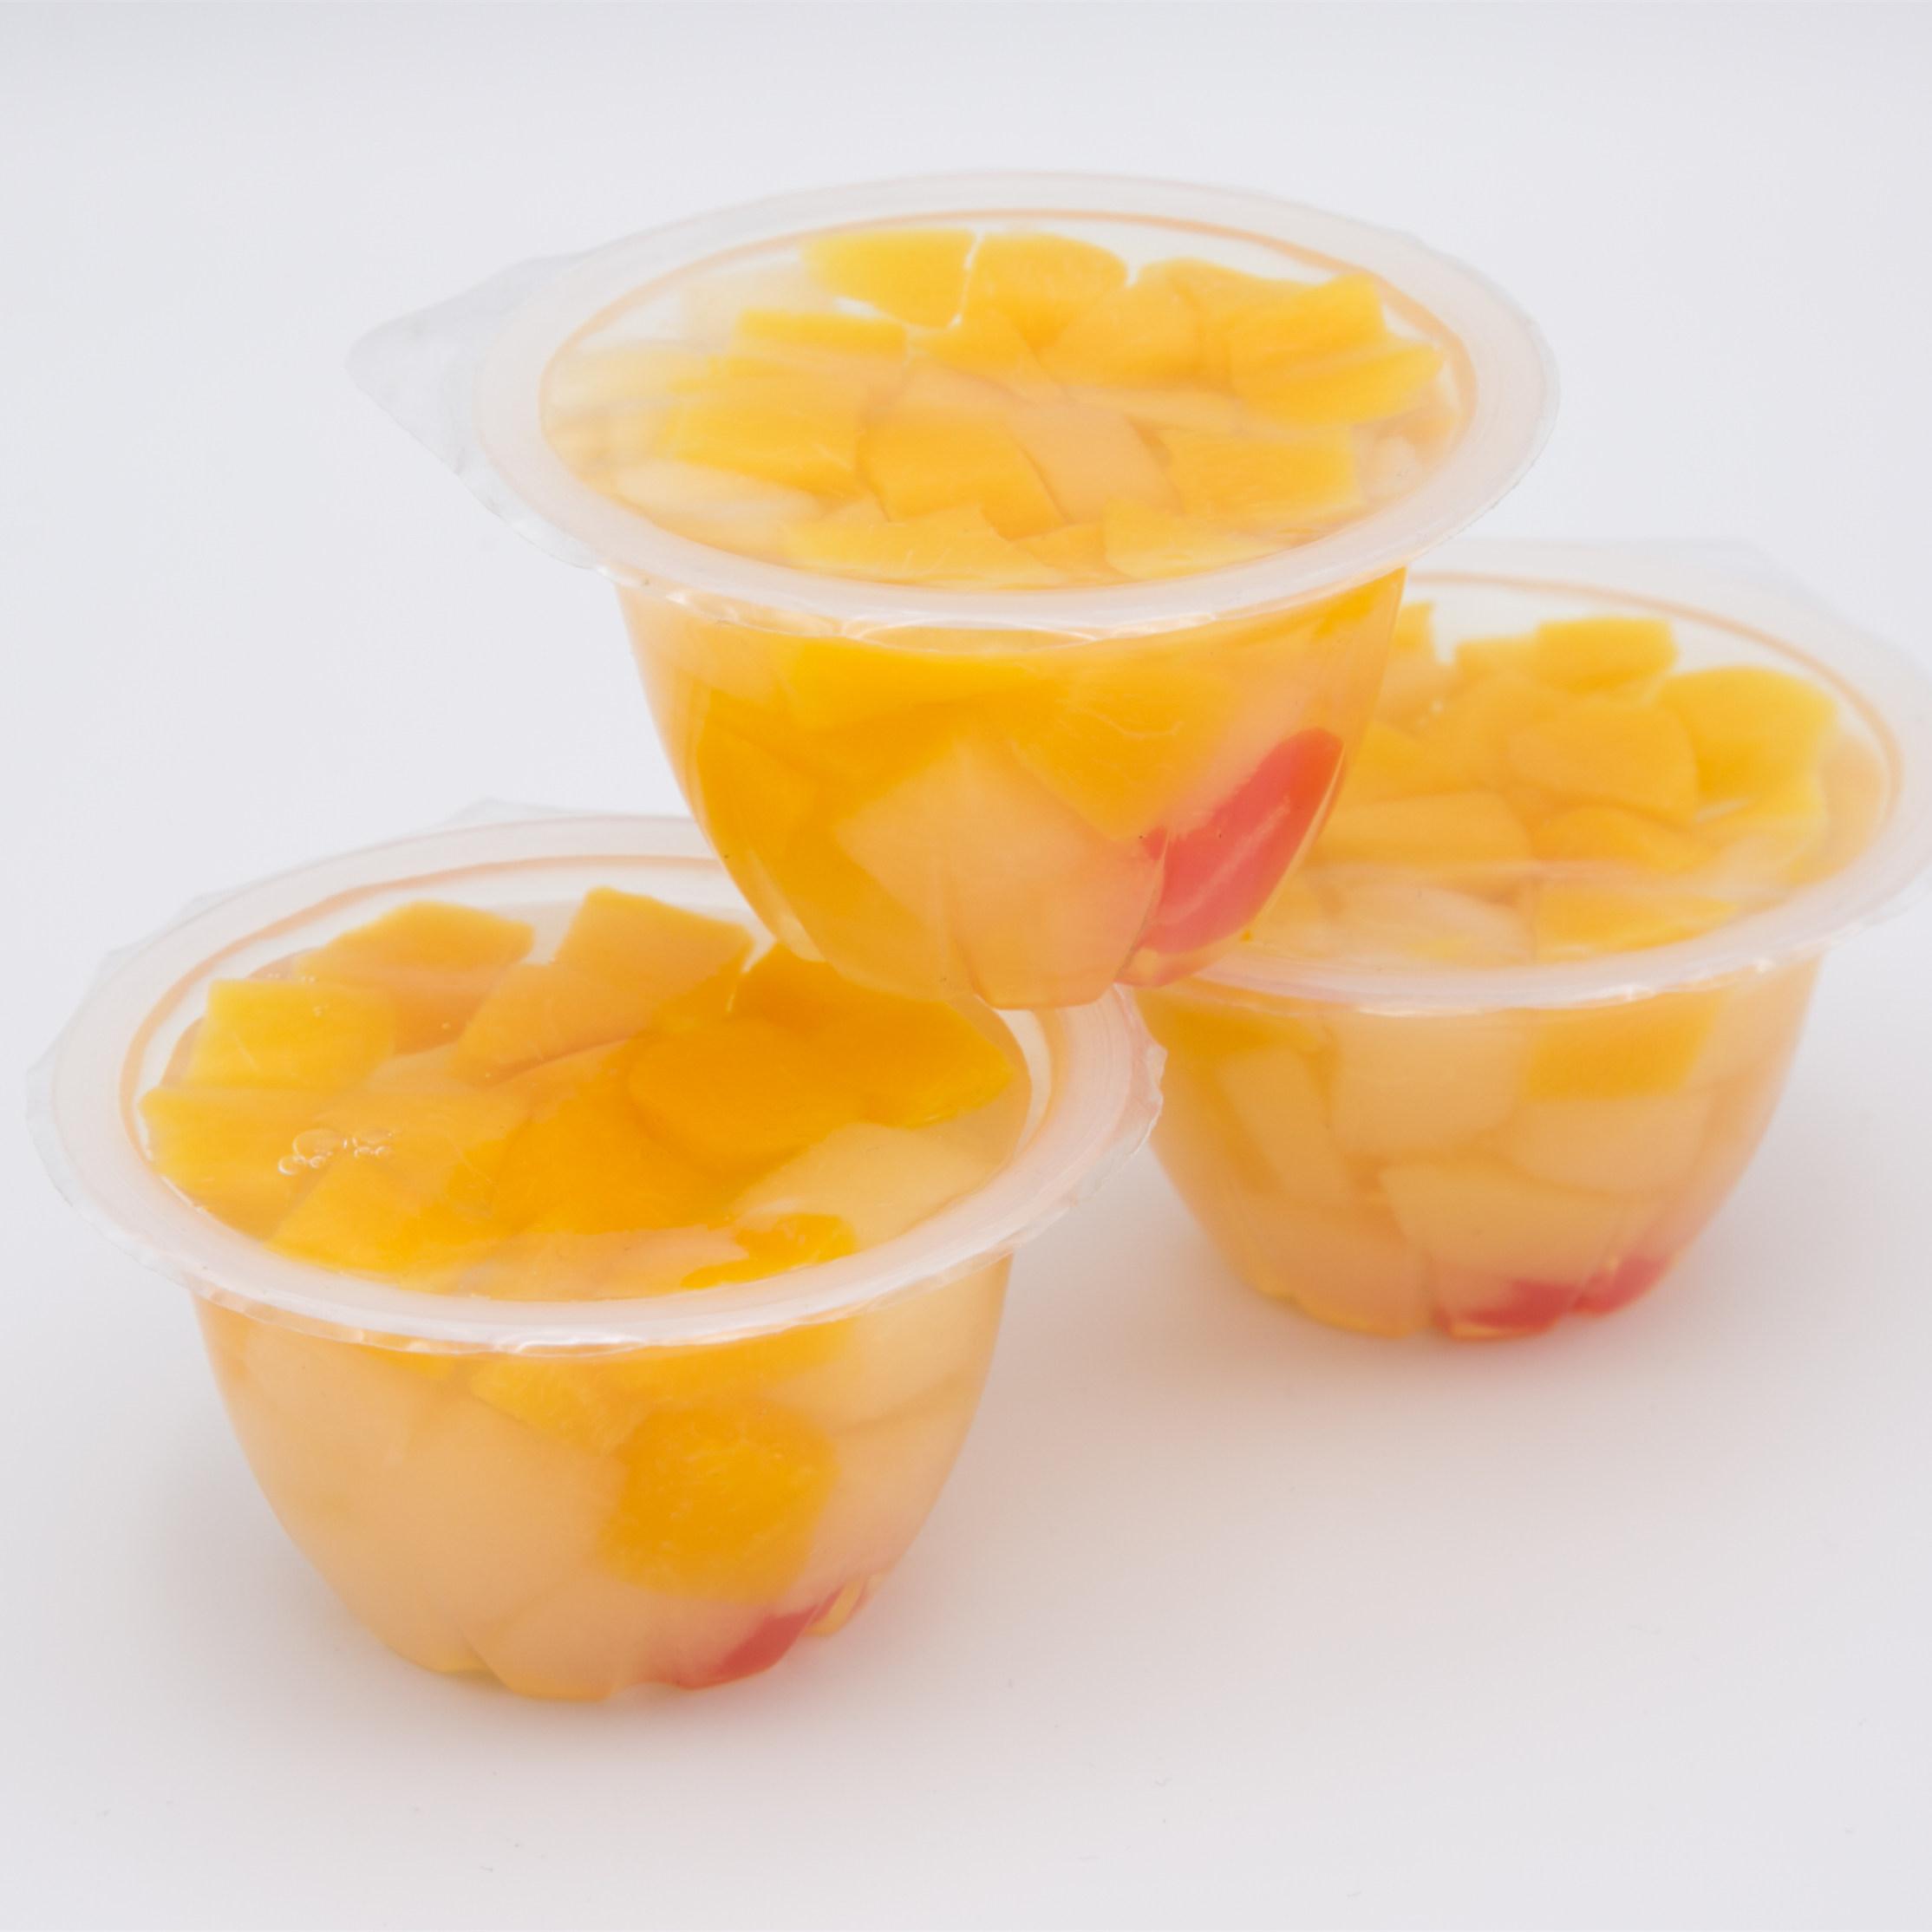 Fruit cups factory china for Canned fruit distributor